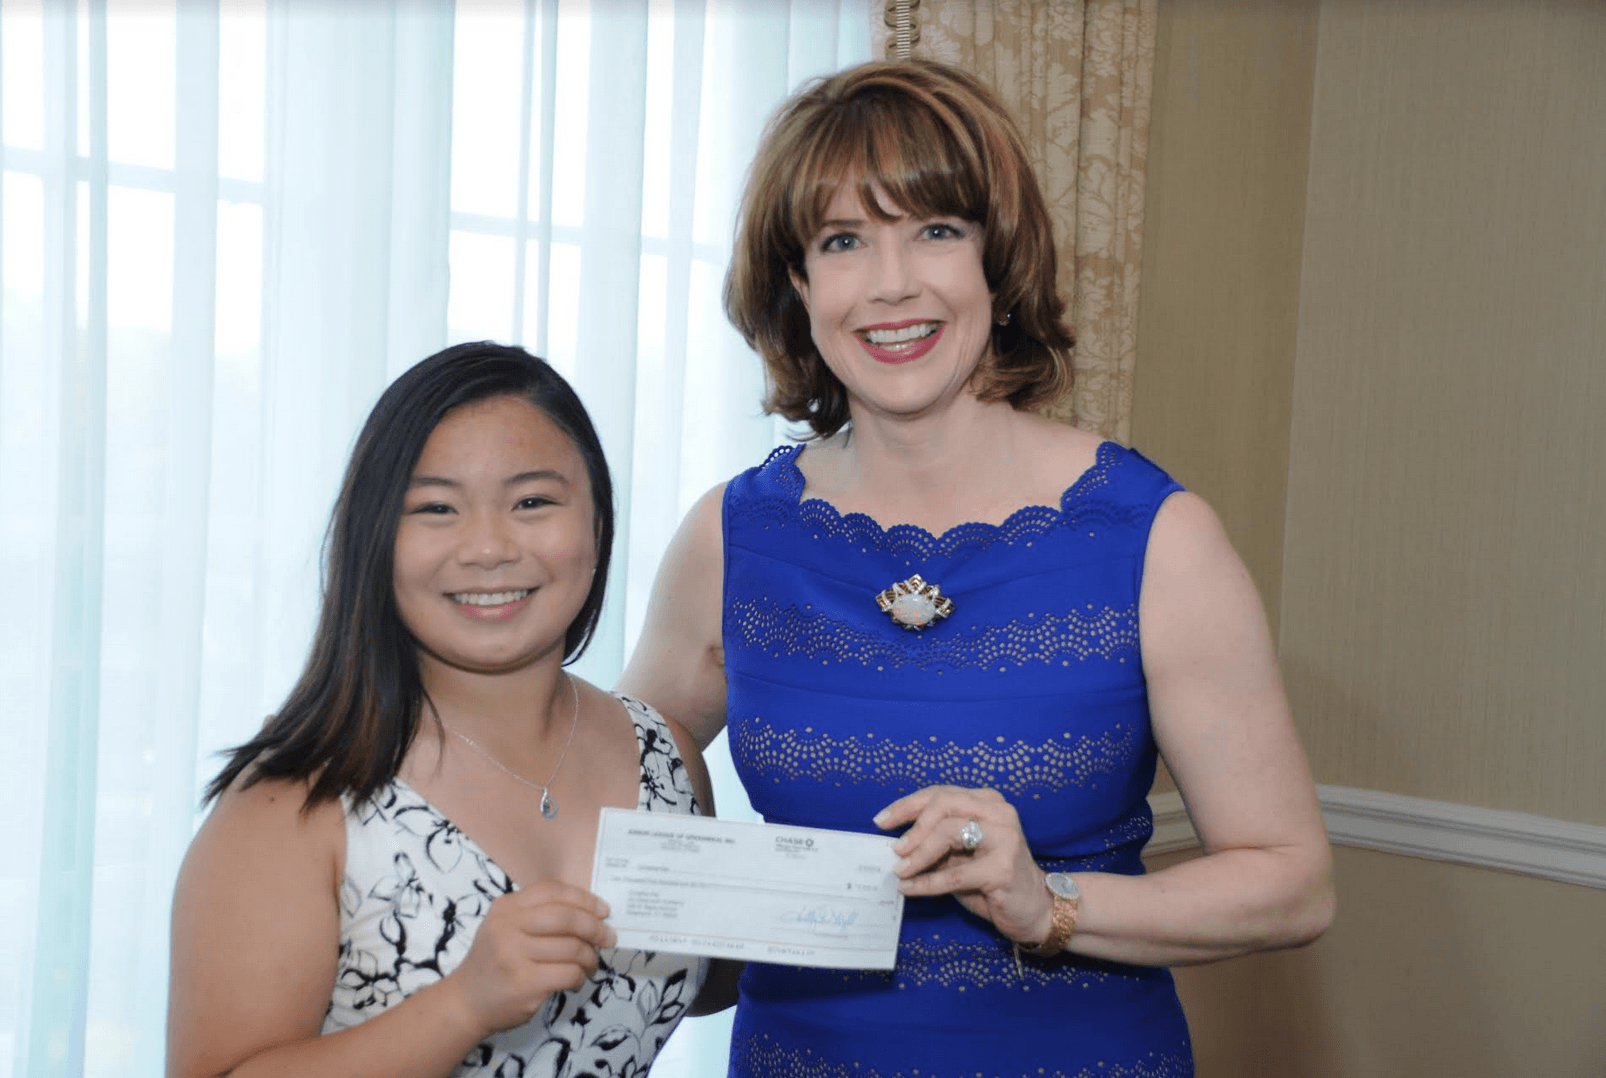 Community Service Award recipient Christine Kao with Hilary Watson, Junior League of Greenwich President-Elect. Contributed photo